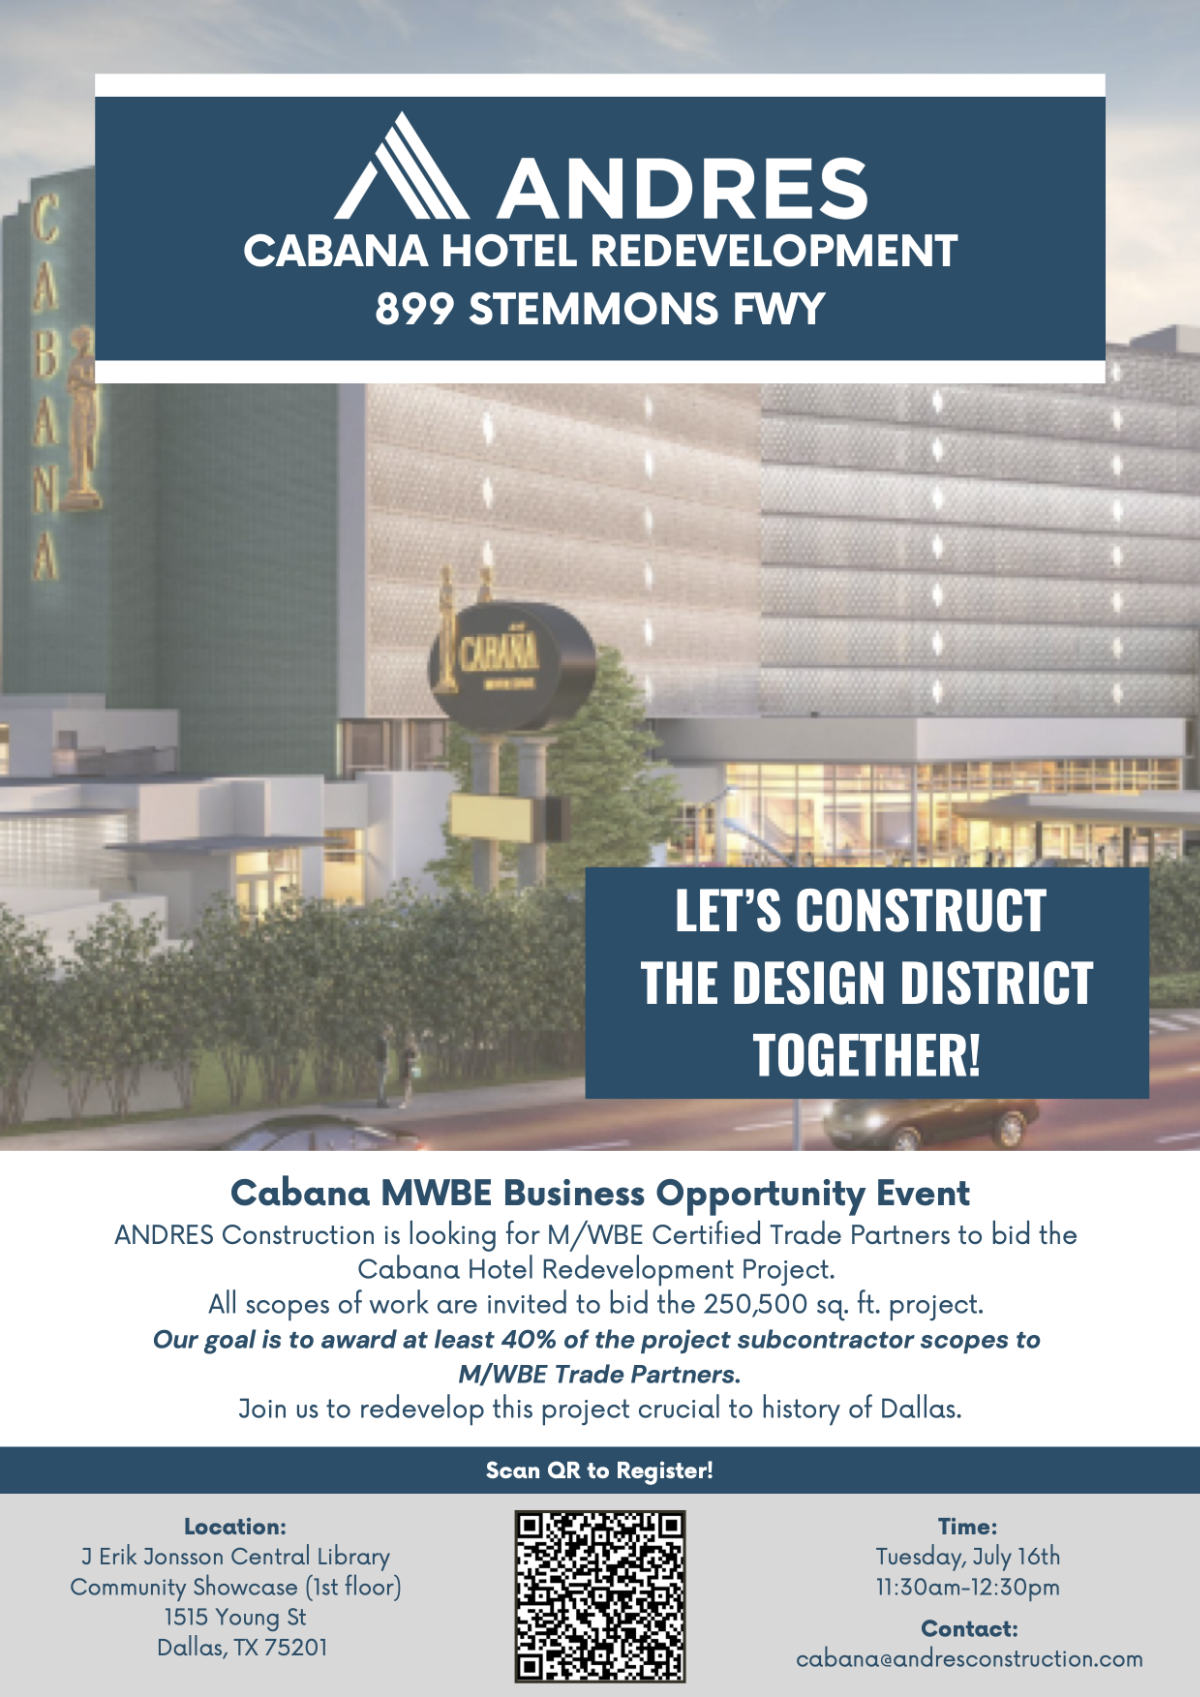 Cabana MWBE Business Opportunity Event